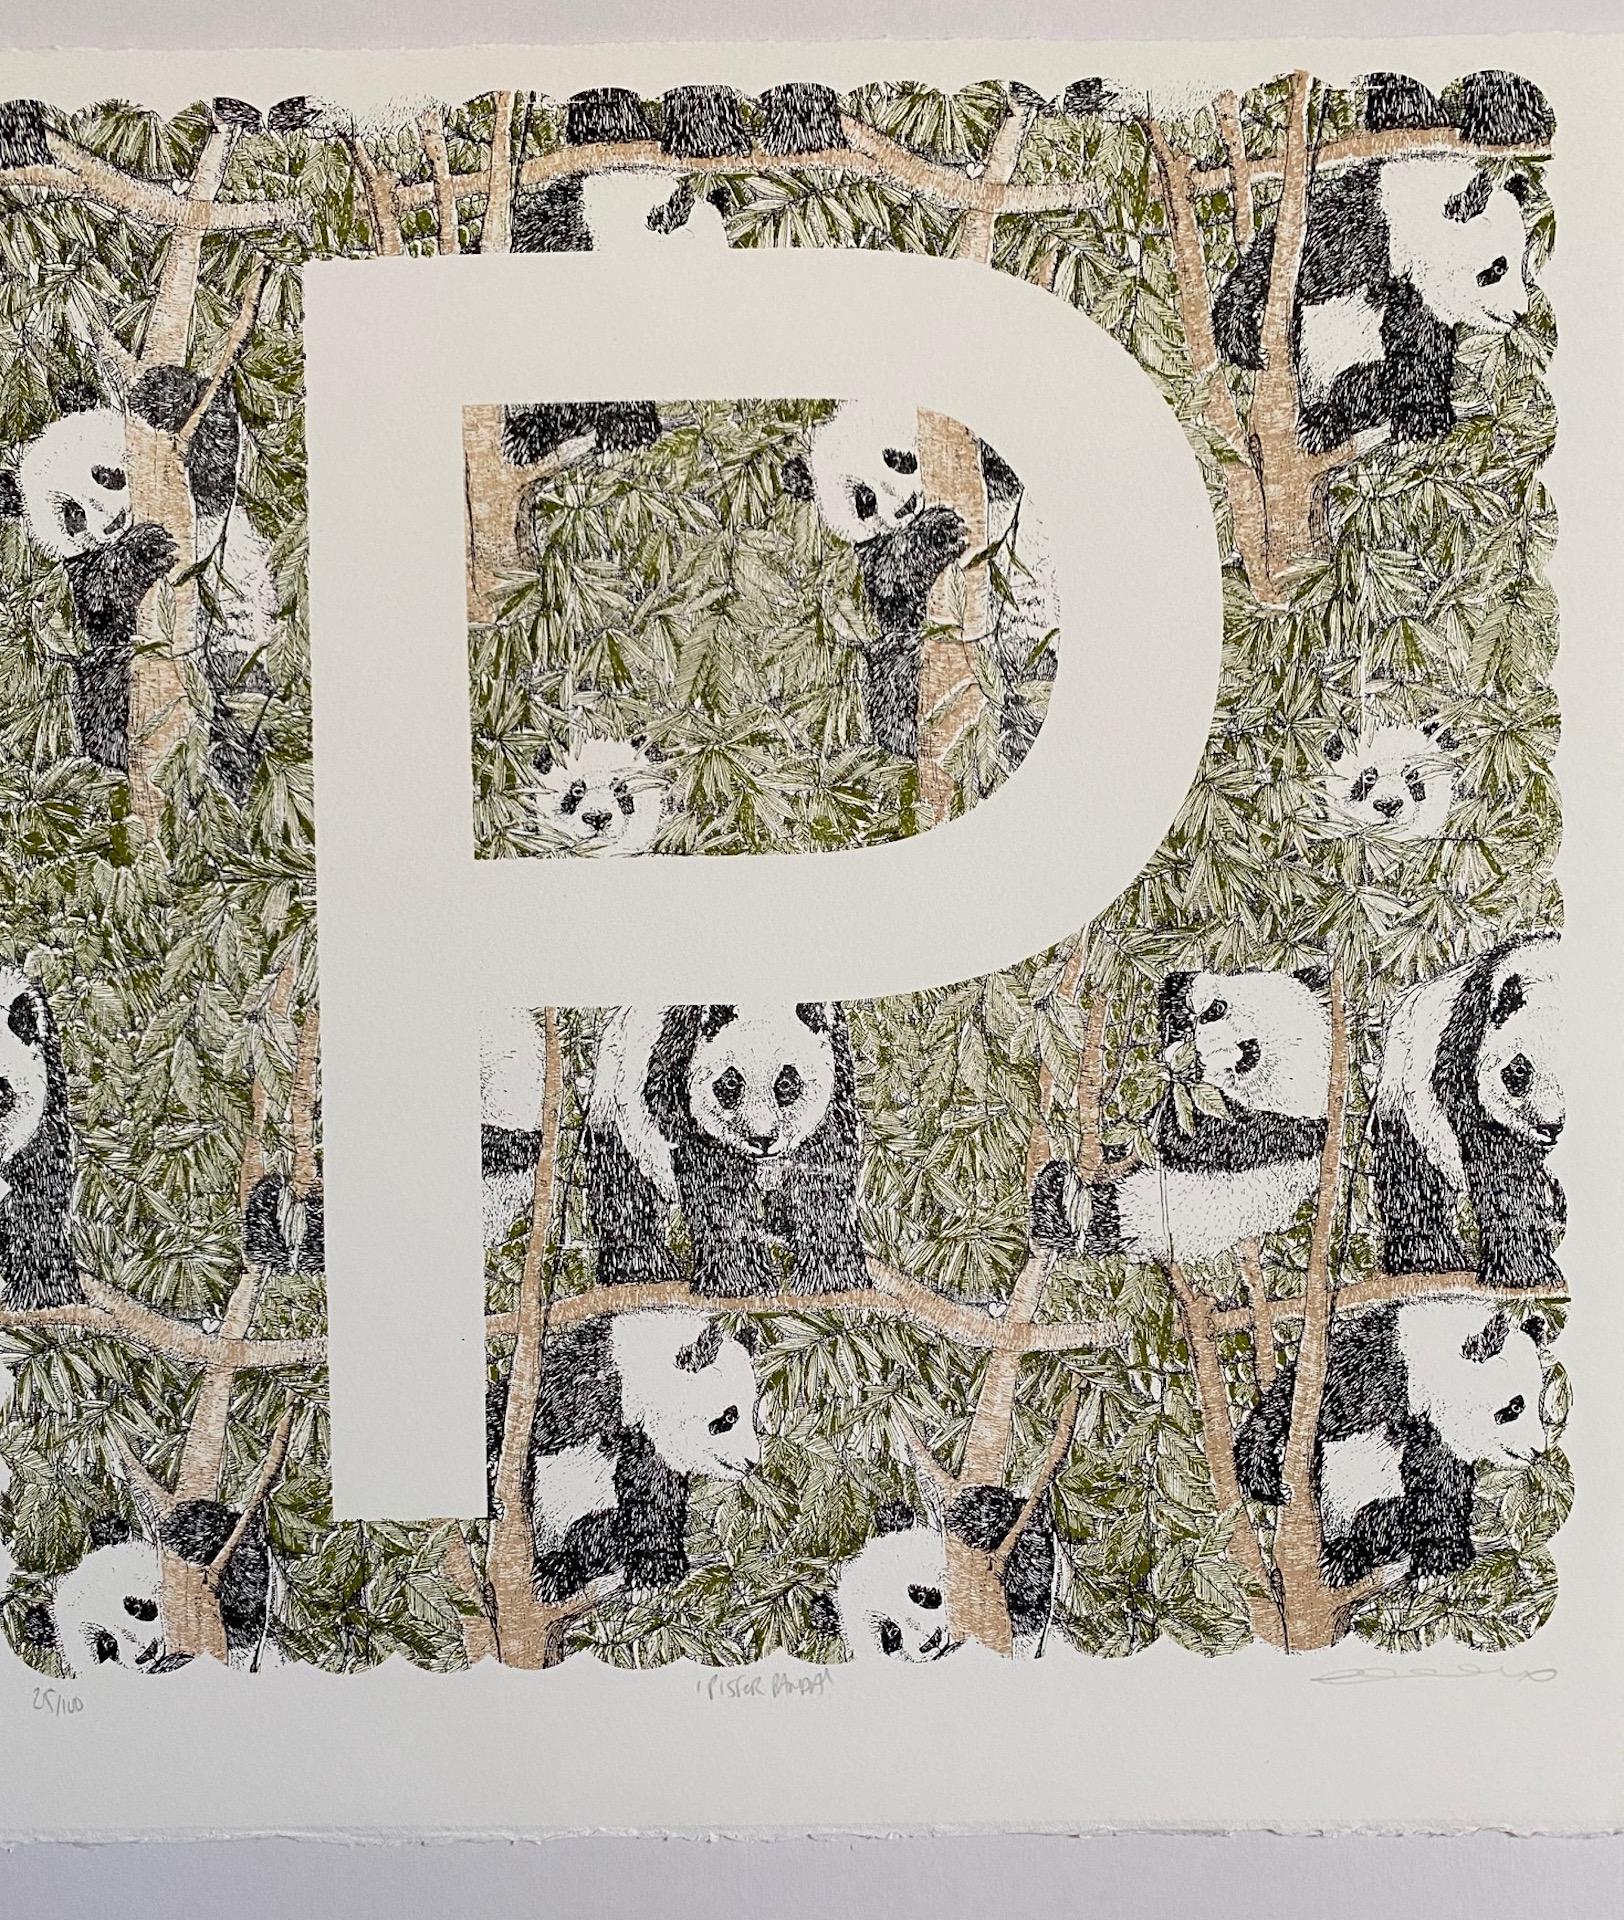 Clare Halifax, P is for Panda, Affordable Contemporary Art, Alphabet Prints 1